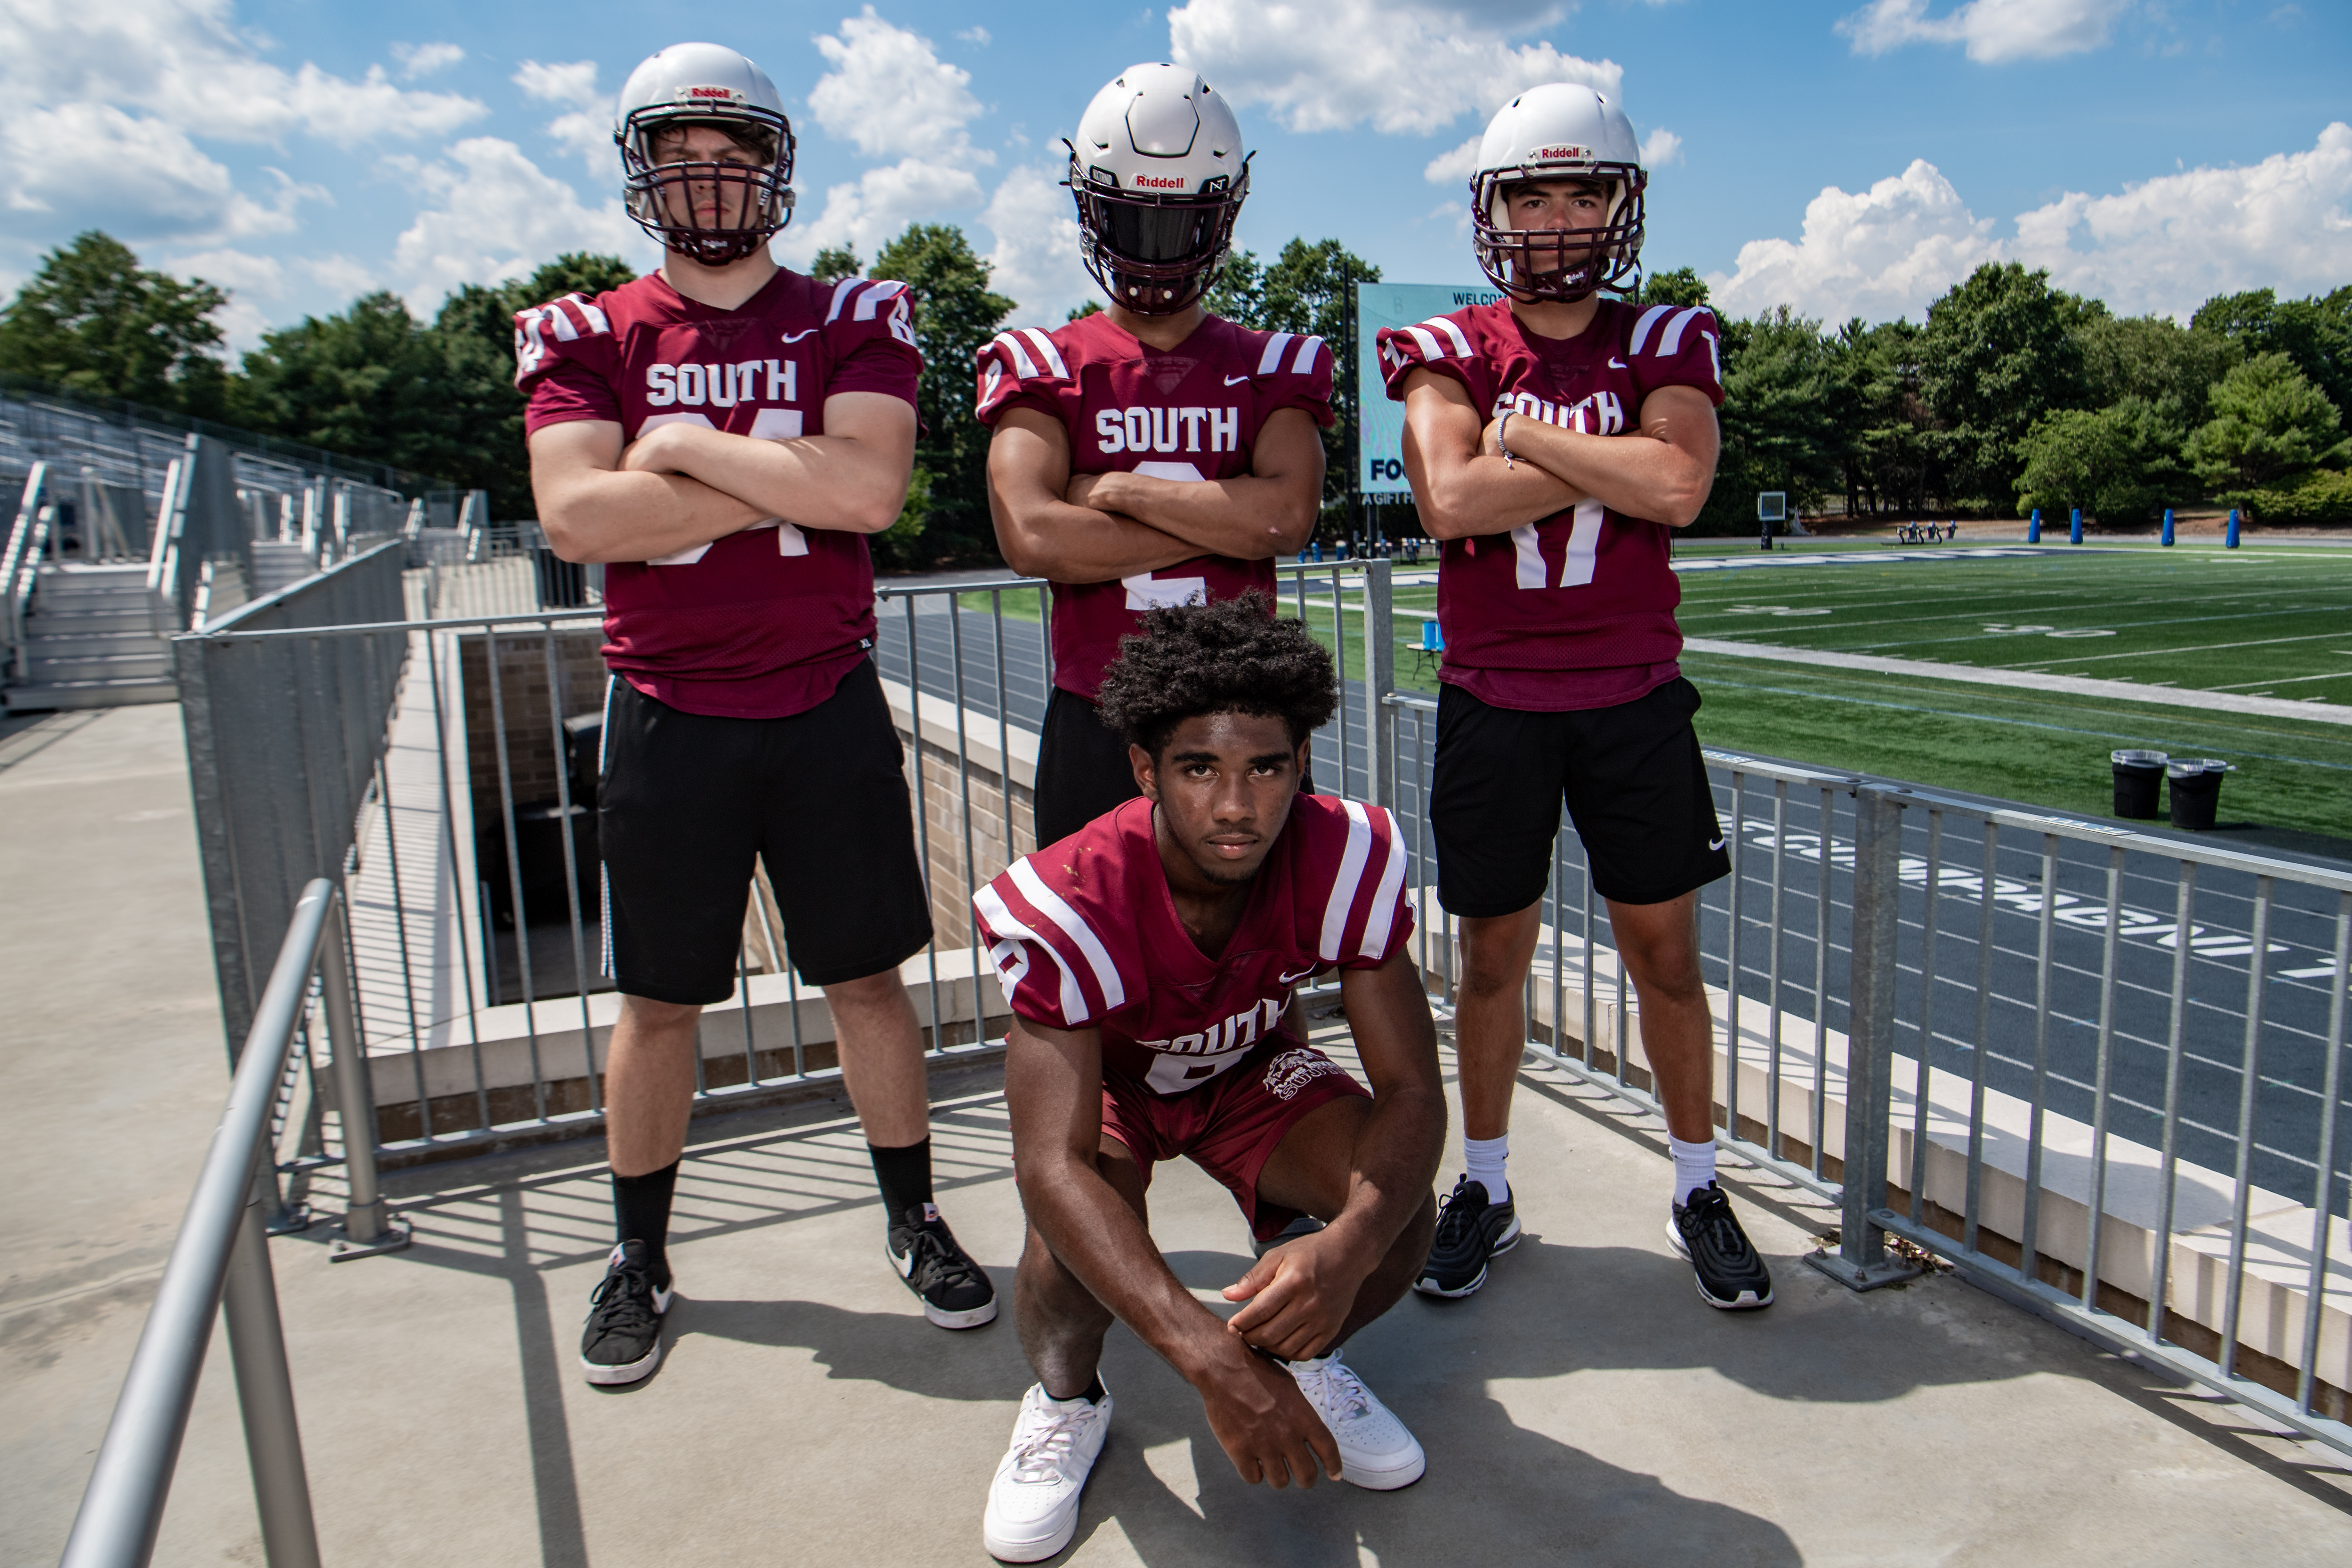 Toms River East NJ football 2021 season preview: Ready to defy the